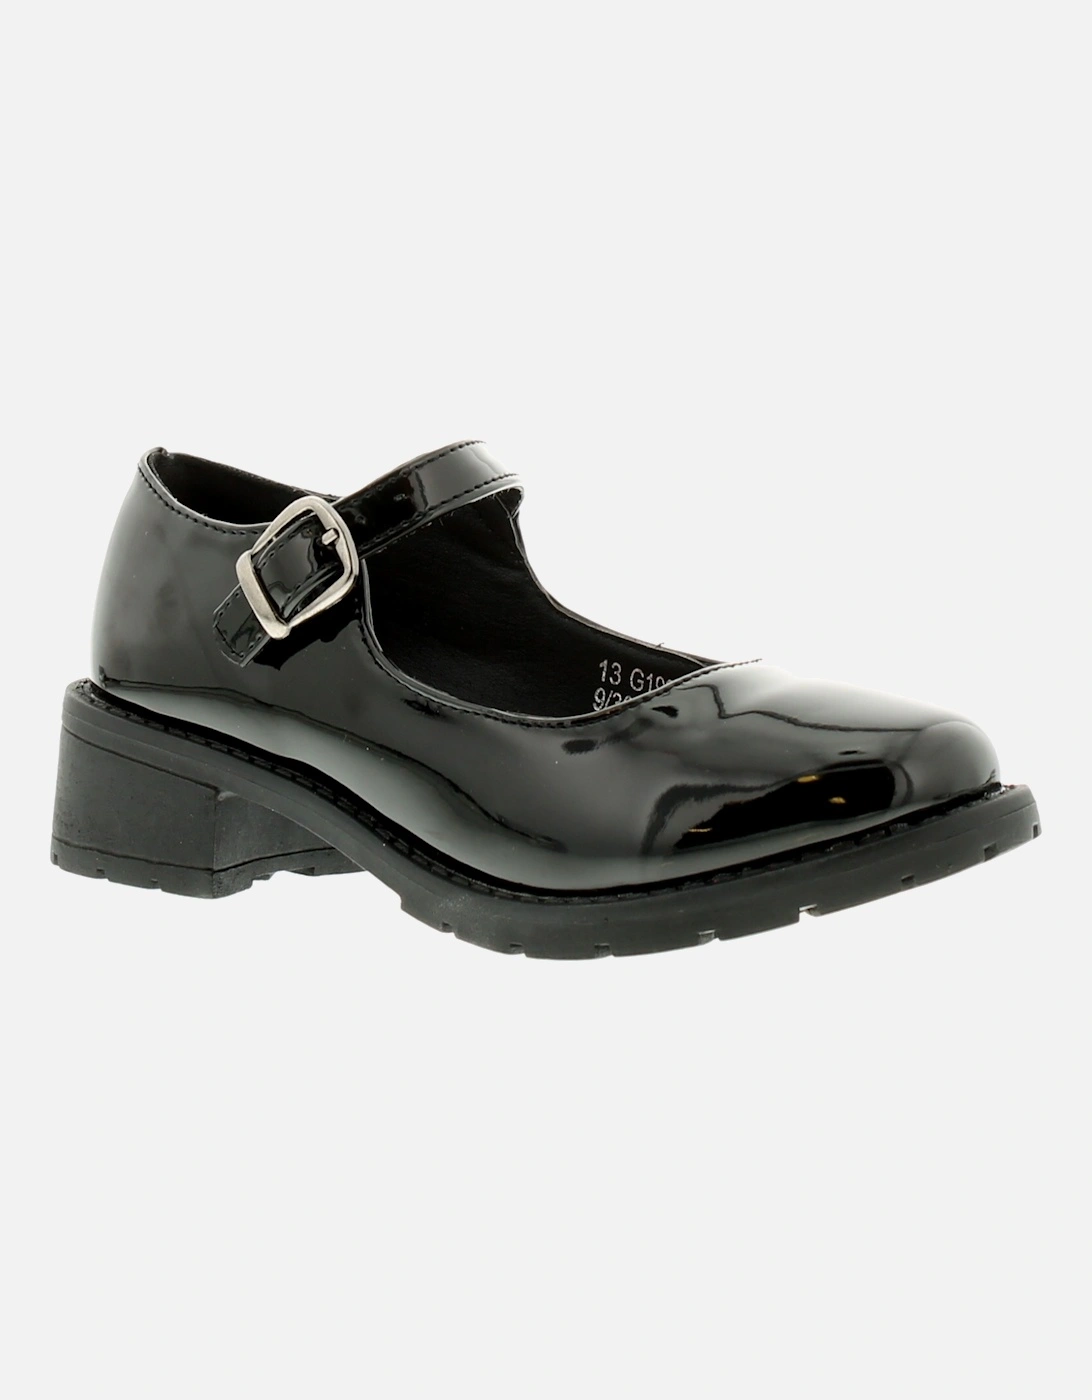 Girls Shoes School Dolly Buckle black patent UK Size, 6 of 5